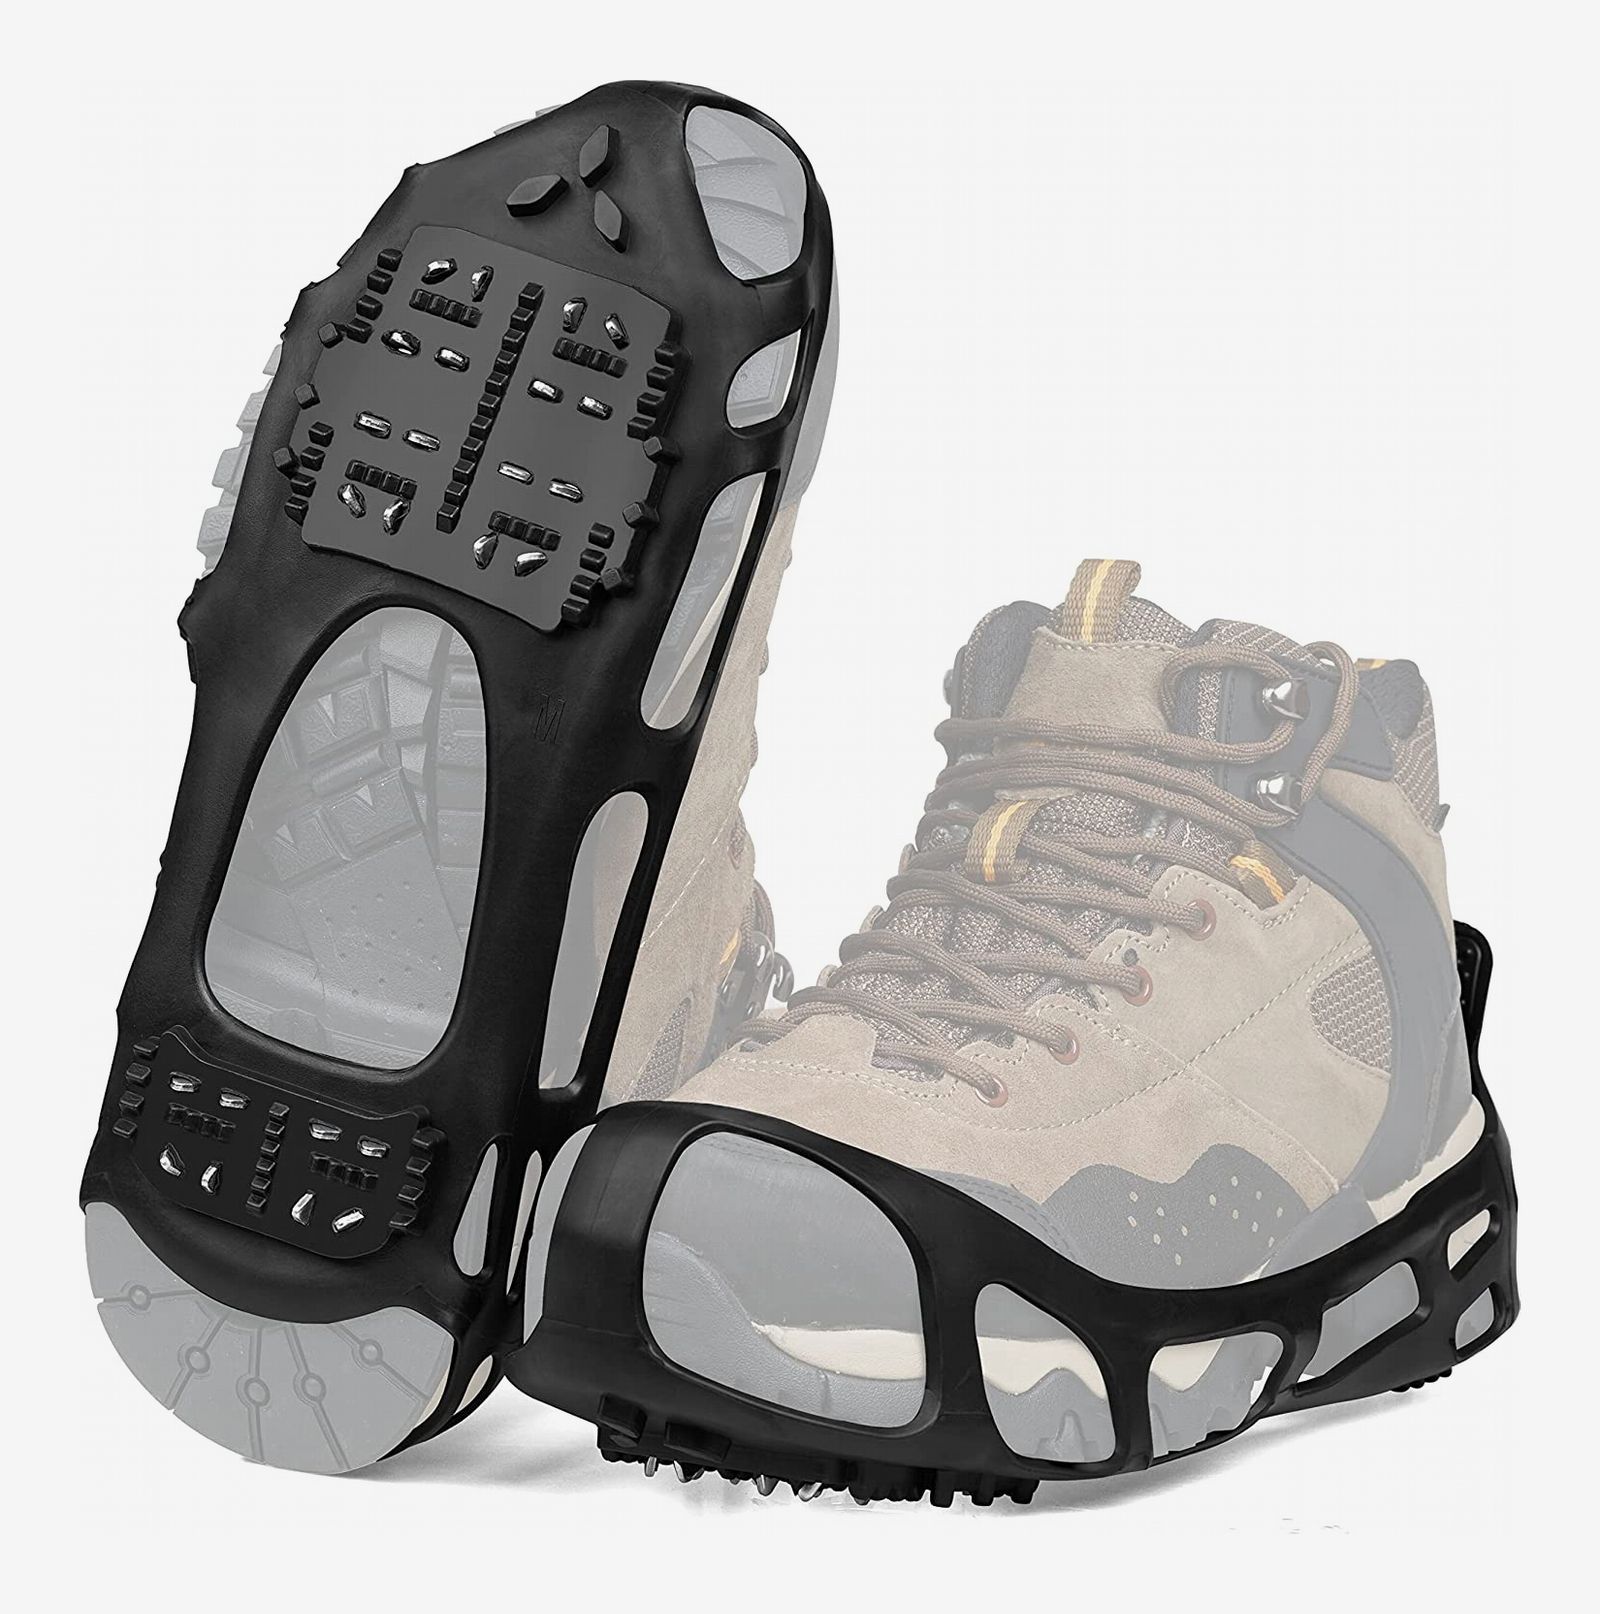 Details about   Winter Ice Snow Grips Gripper Crampons Cleat Shoes Spike Boots Anti Slip Durable 